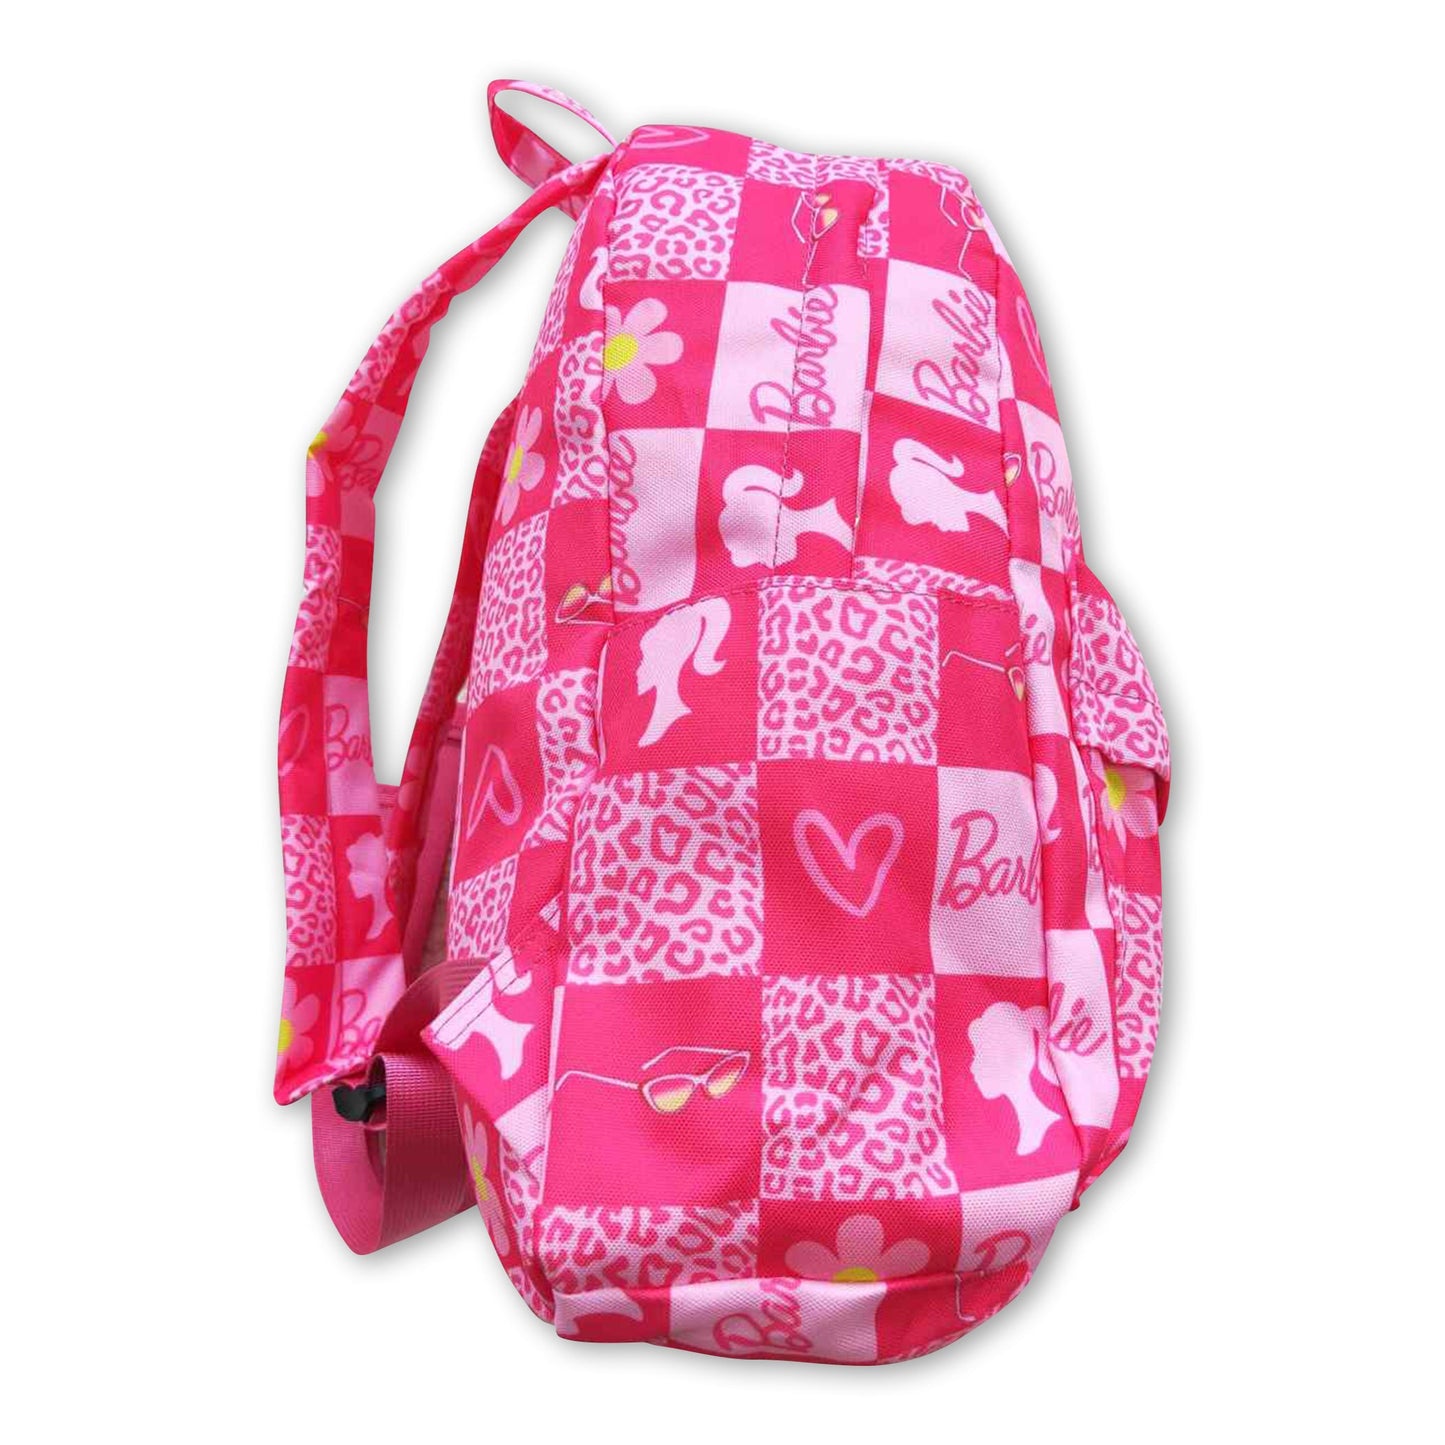 Leopard floral heart patchwork party girls backpack